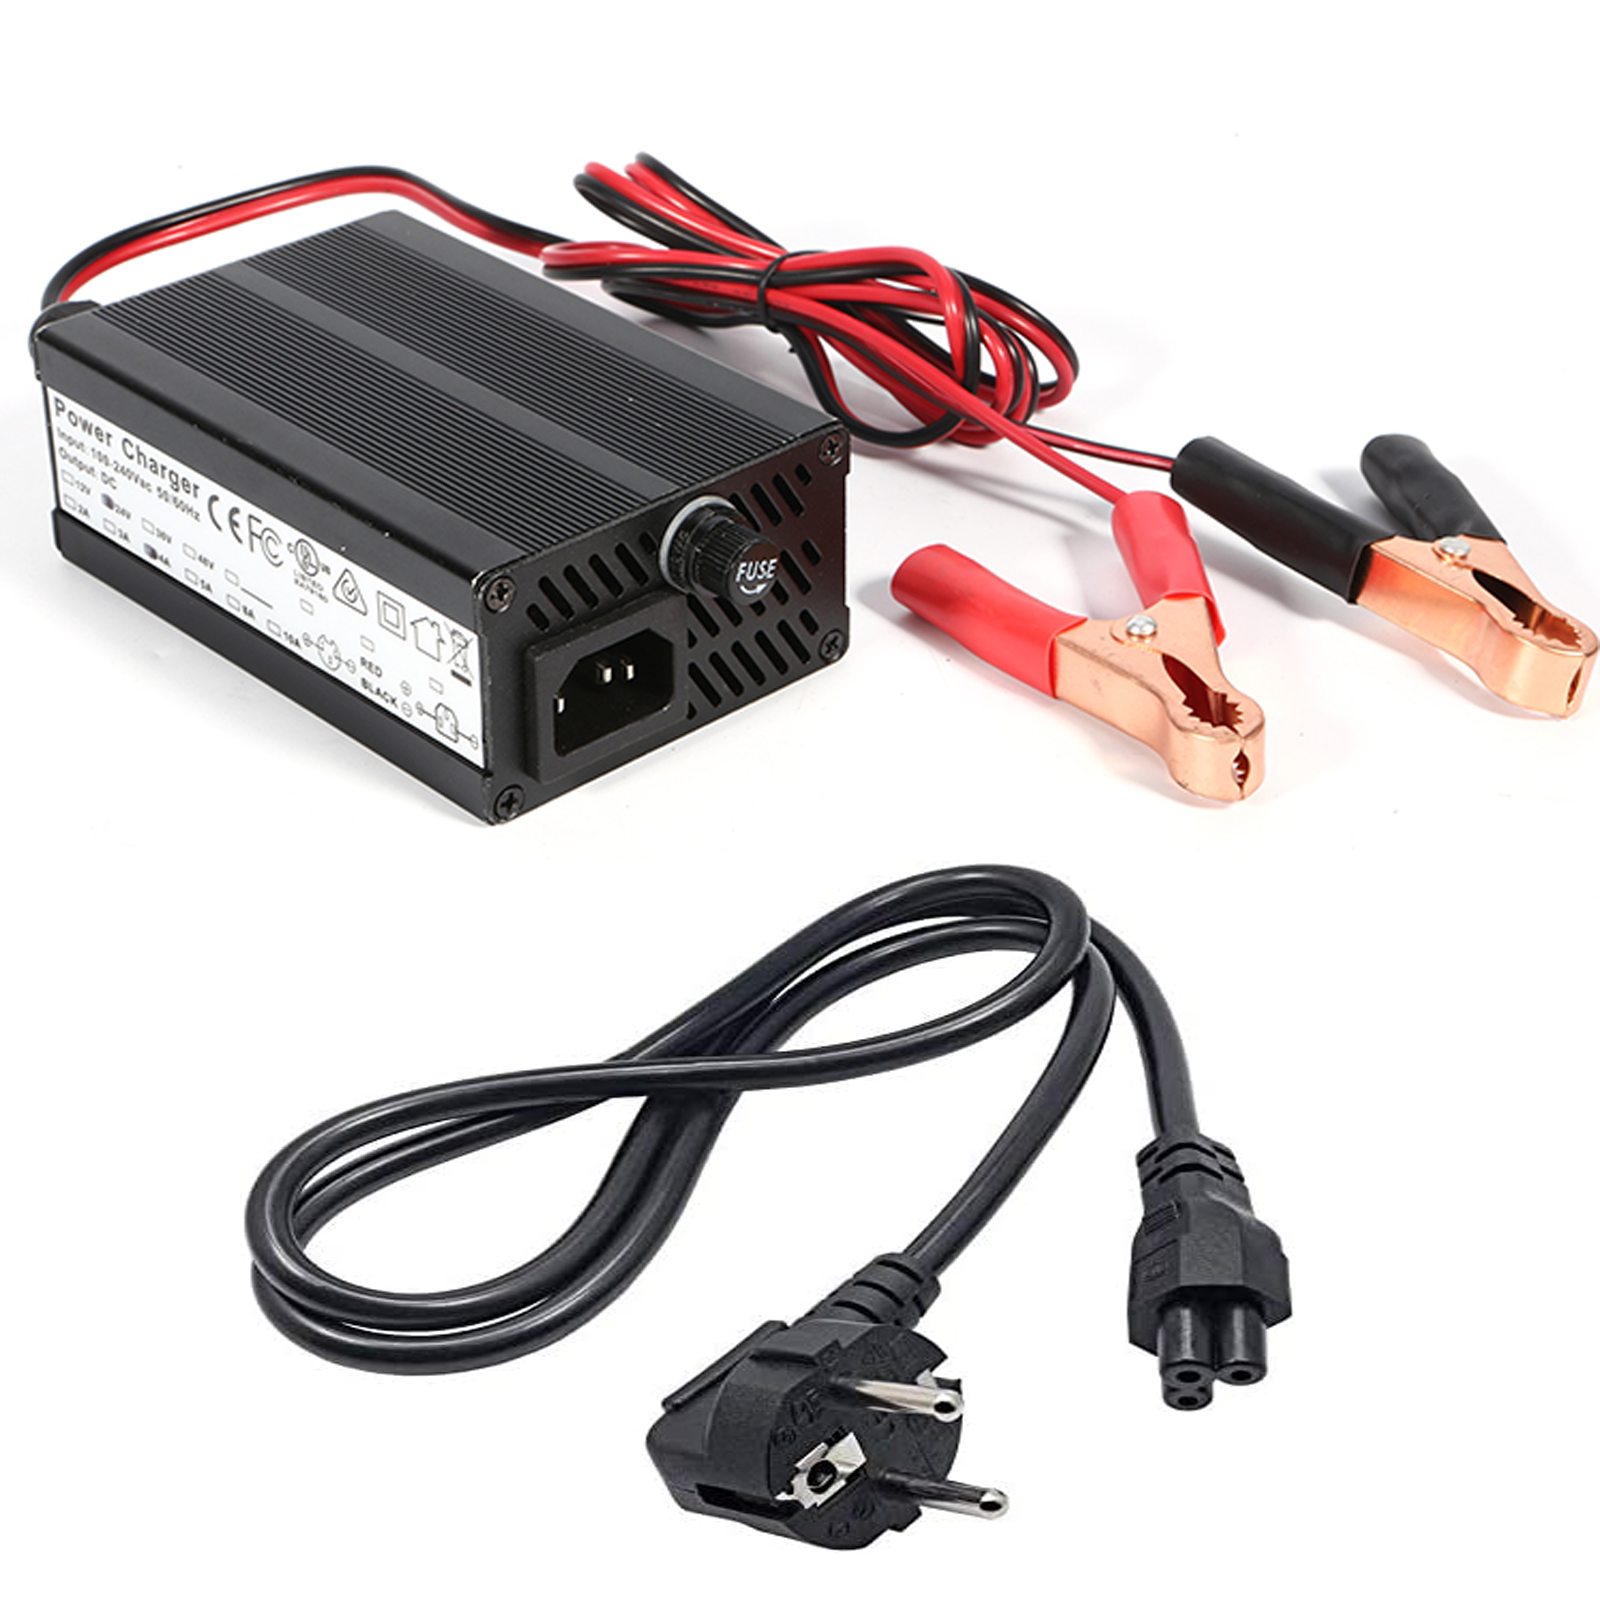 TezePower 14.6V 10A LiFePO4 Lithium Battery Charger